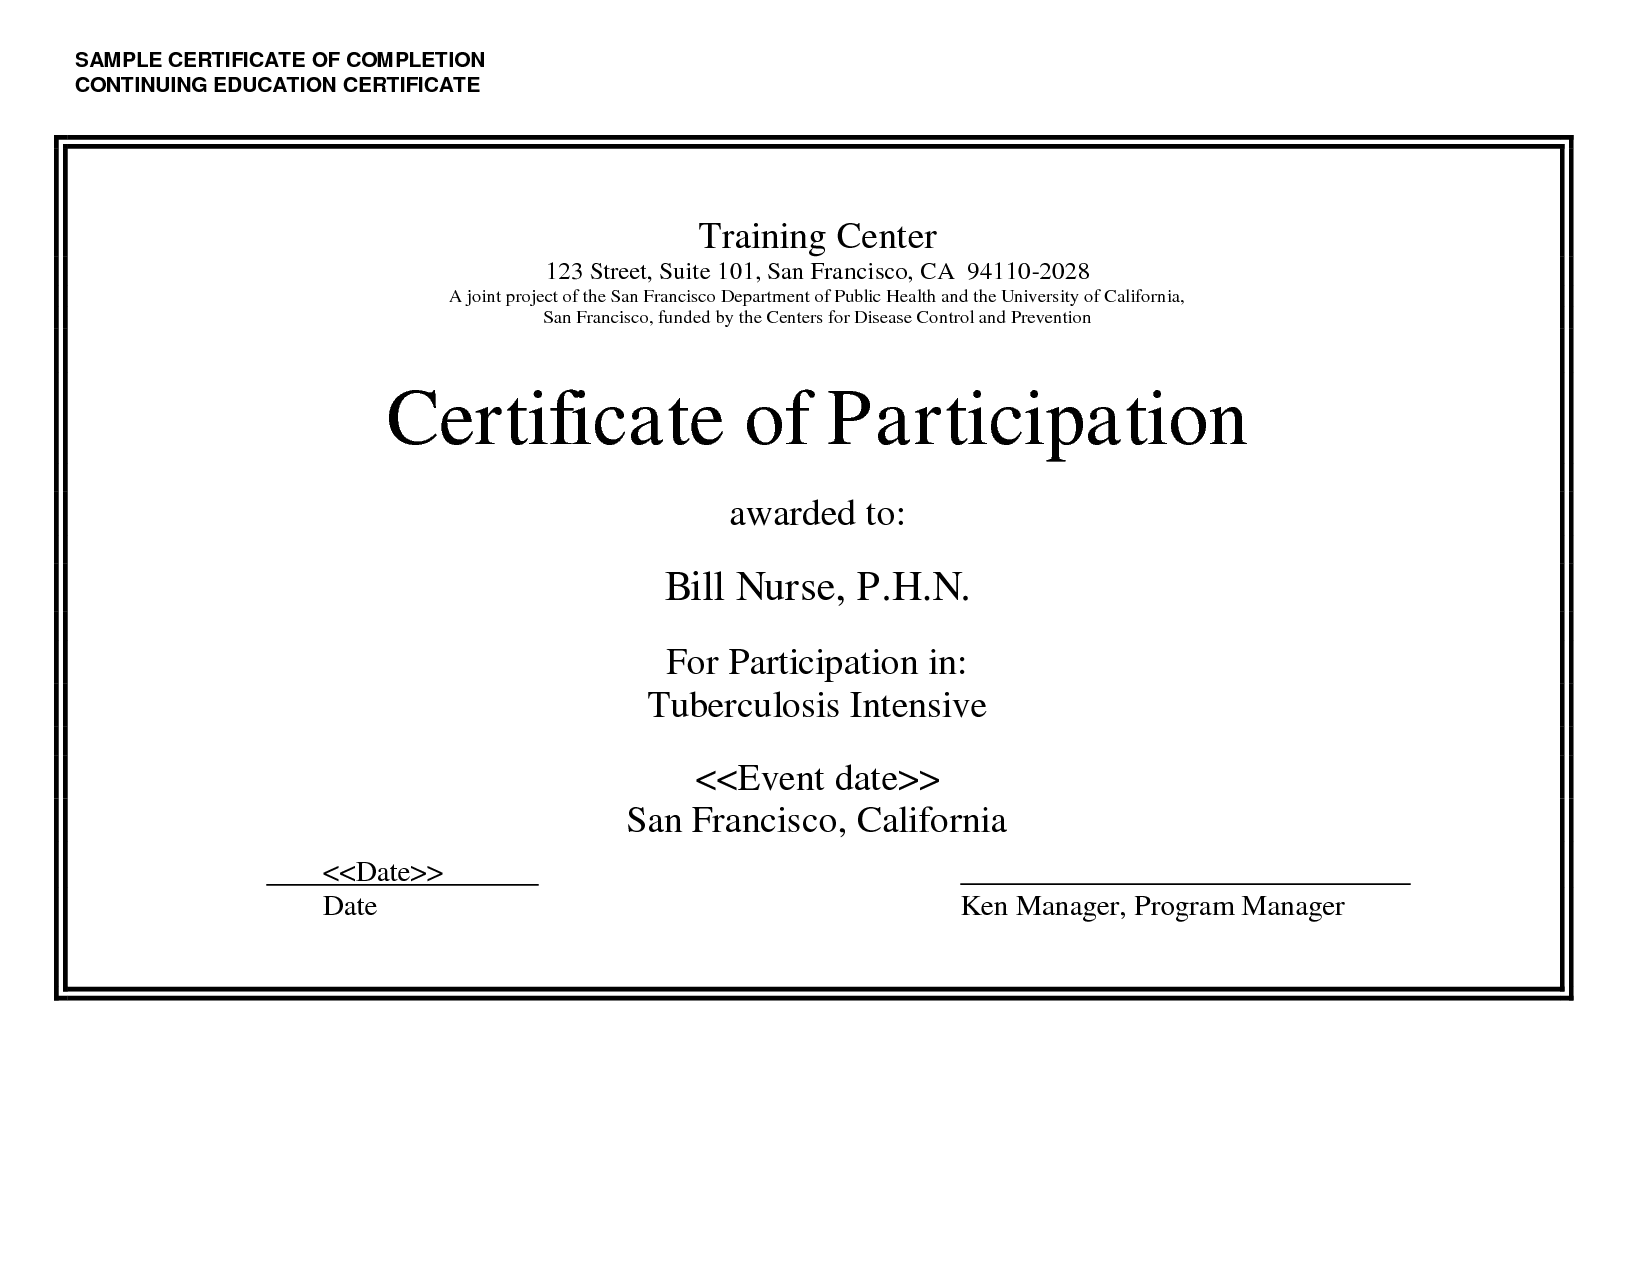 certificate of completion of continuing education course requirements